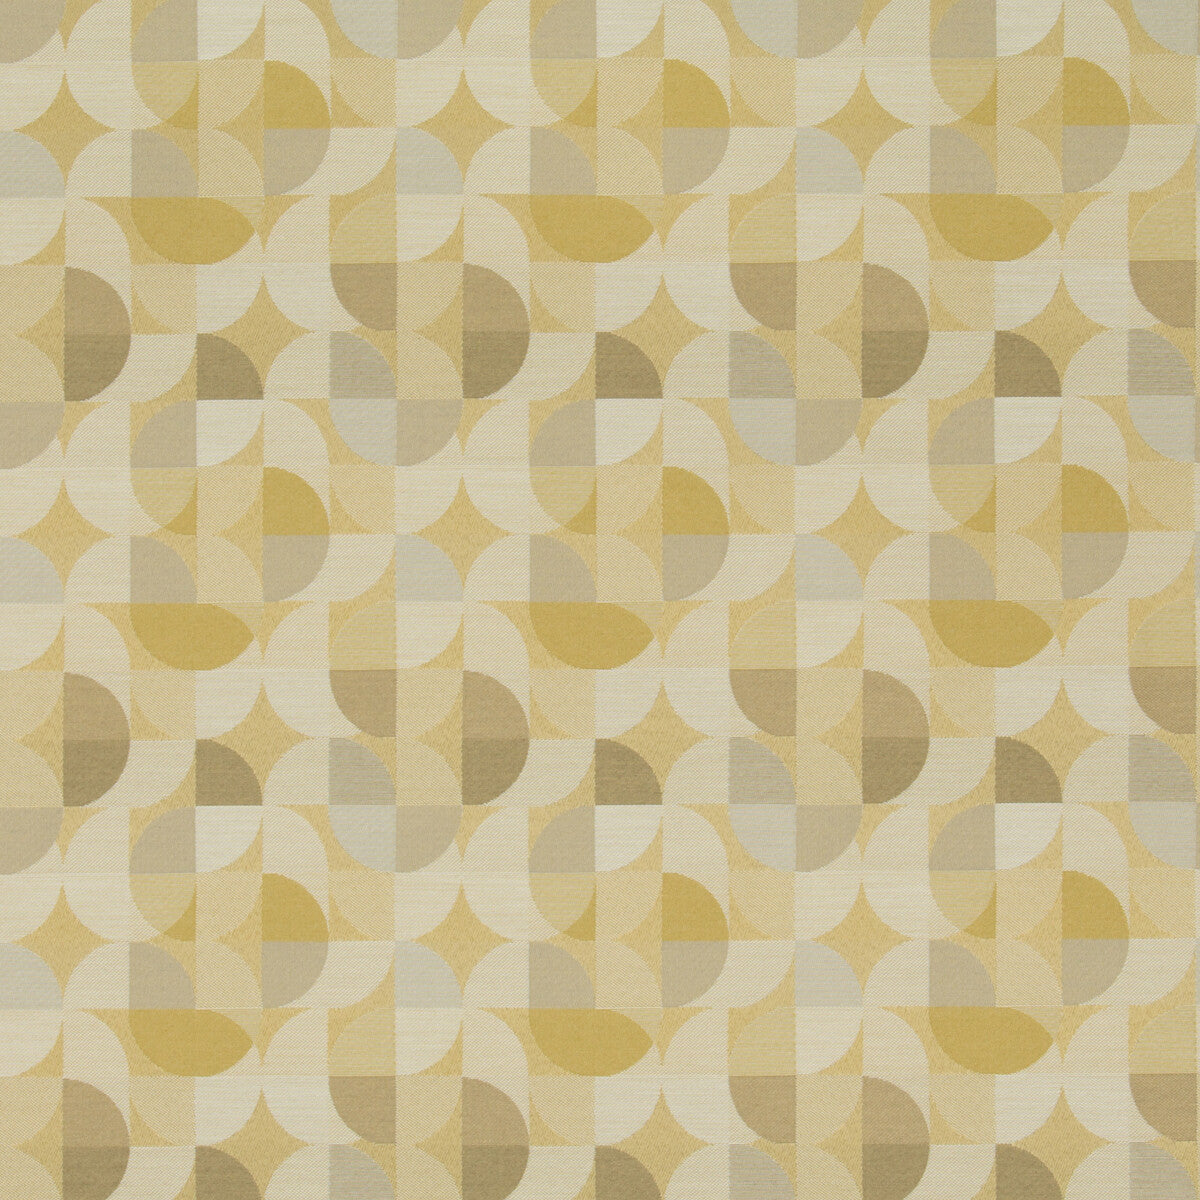 Mix Up fabric in tupelo color - pattern 35090.14.0 - by Kravet Contract in the Gis Crypton collection